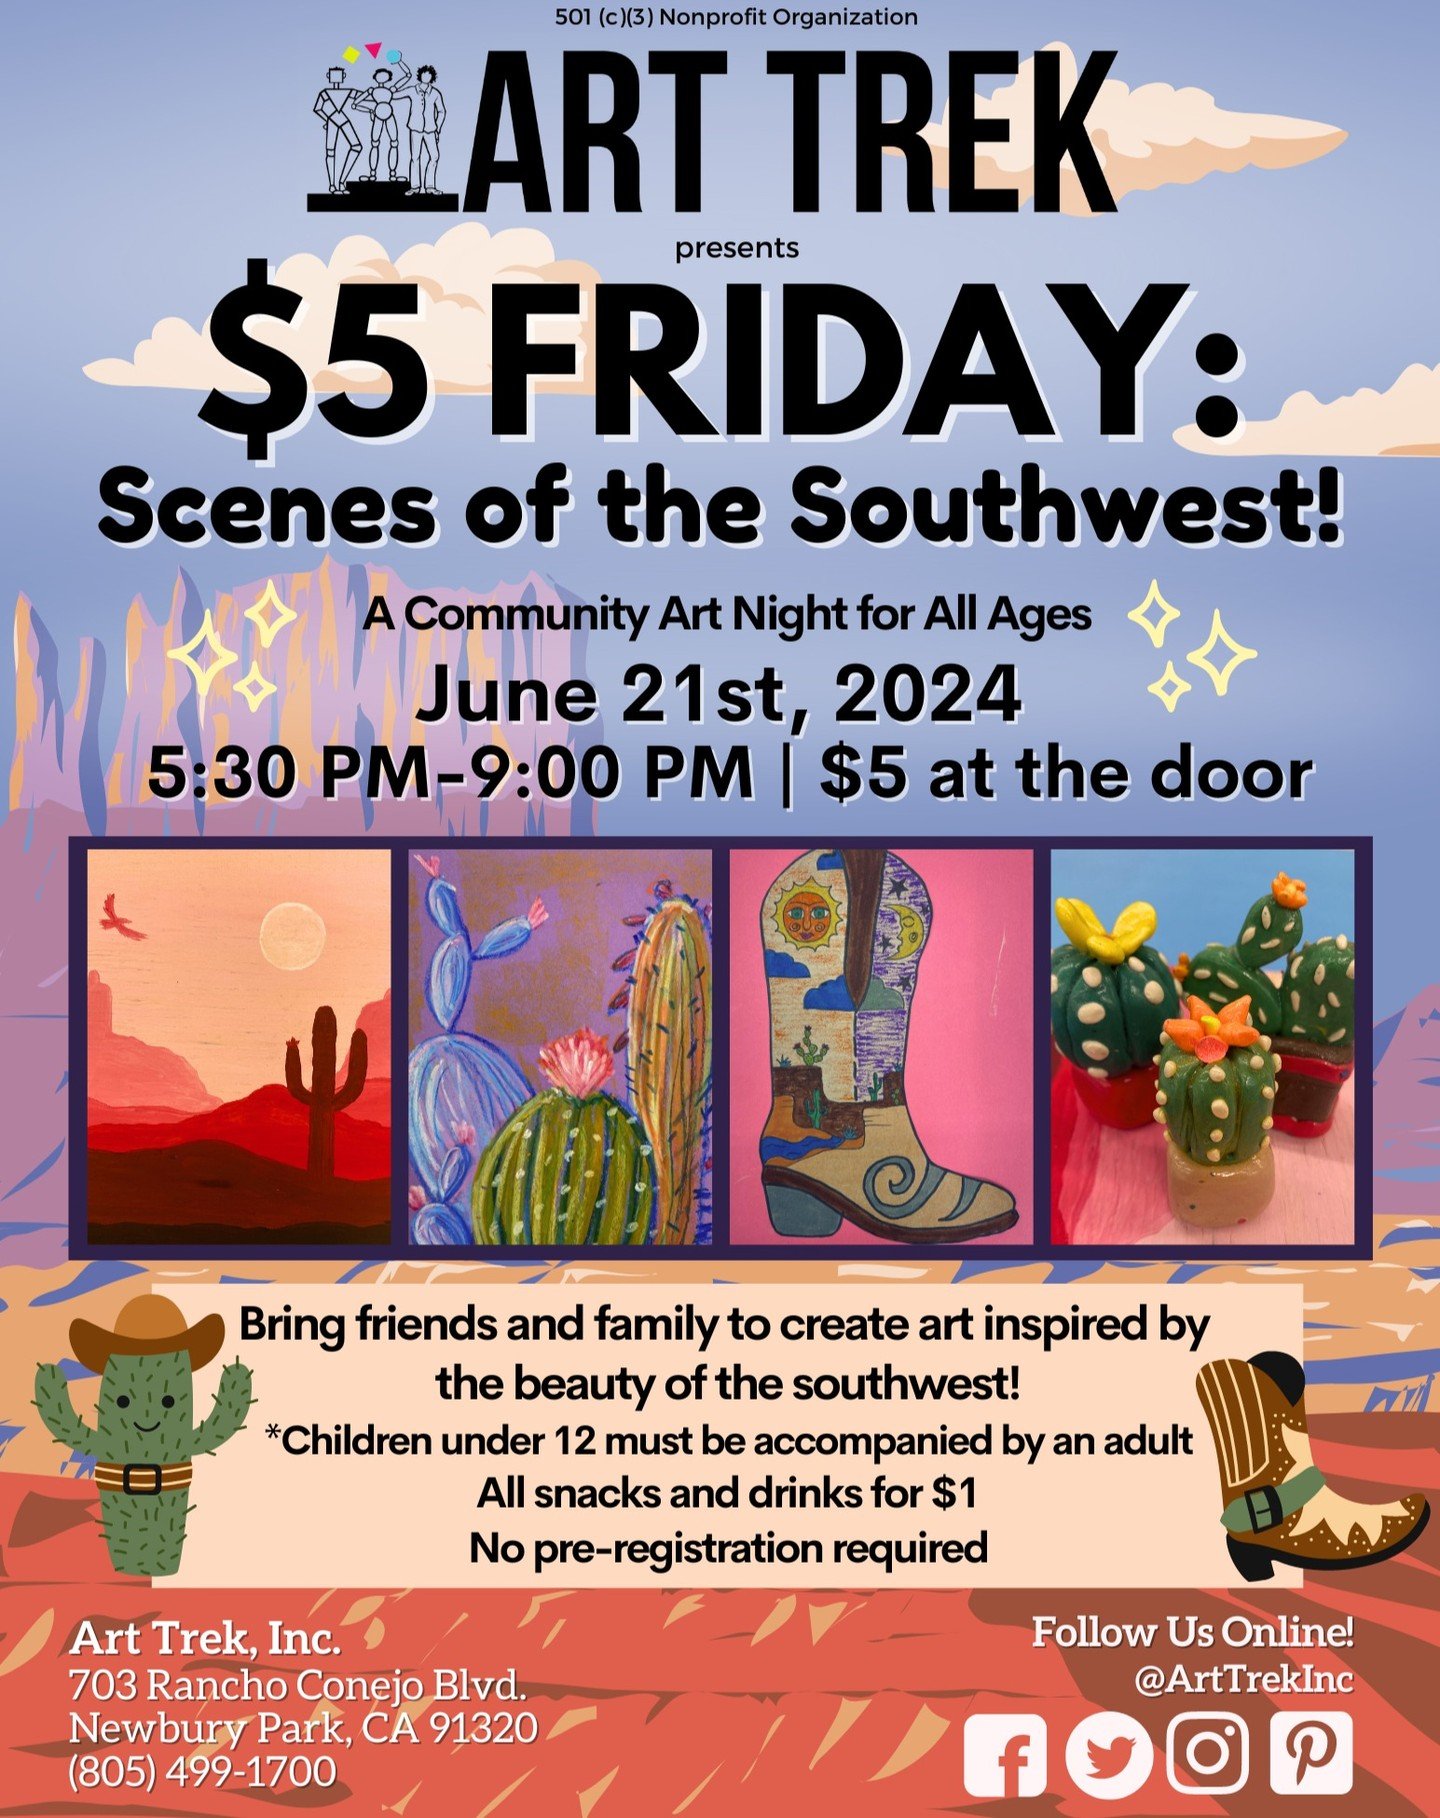 Our theme for $5 Friday is &quot;Scenes of the Southwest!&quot; Swipe for a special preview of this month's projects ⏩ 🎨 

Join us on Friday, June 21st to sculpt a Model Magic cactus, paint a monochromatic desert on wood panels, design your own boot